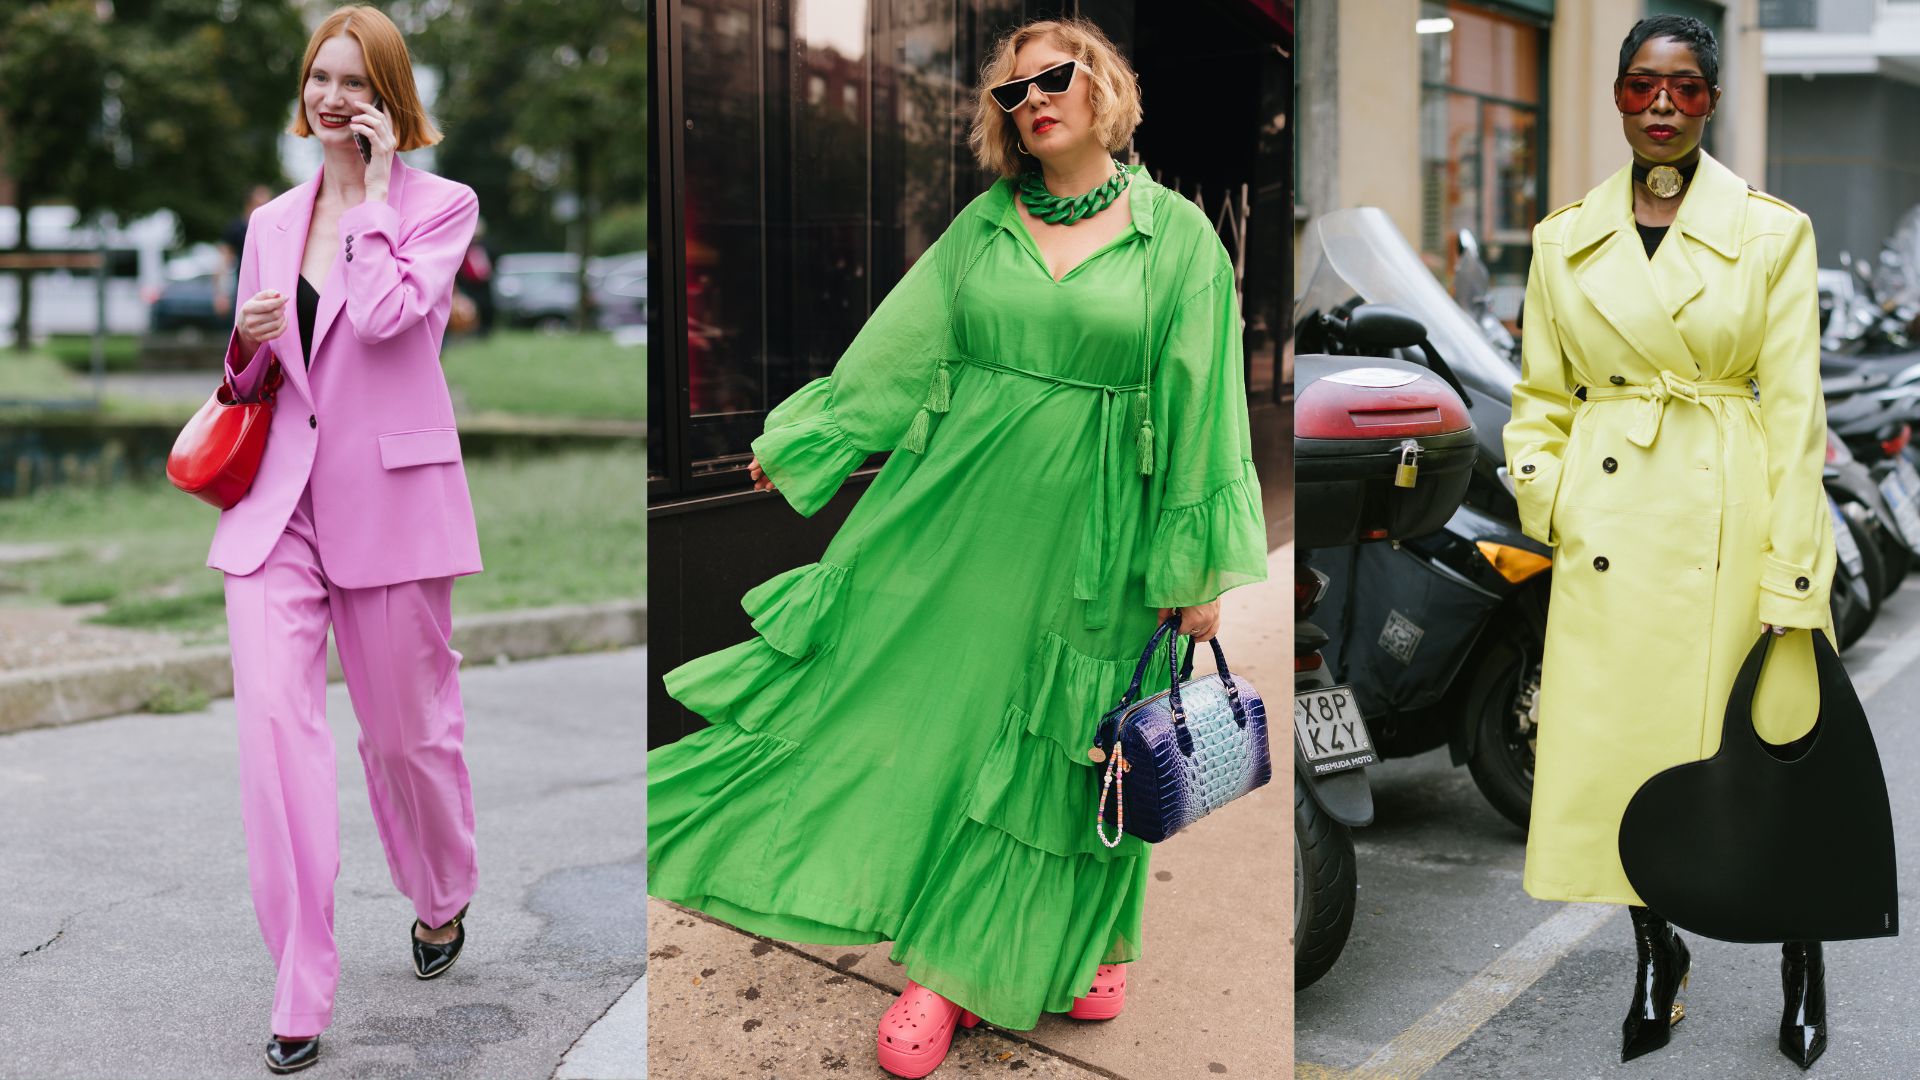 I Had a Stylist Find Which Colors Look Best on Me, and It Worked